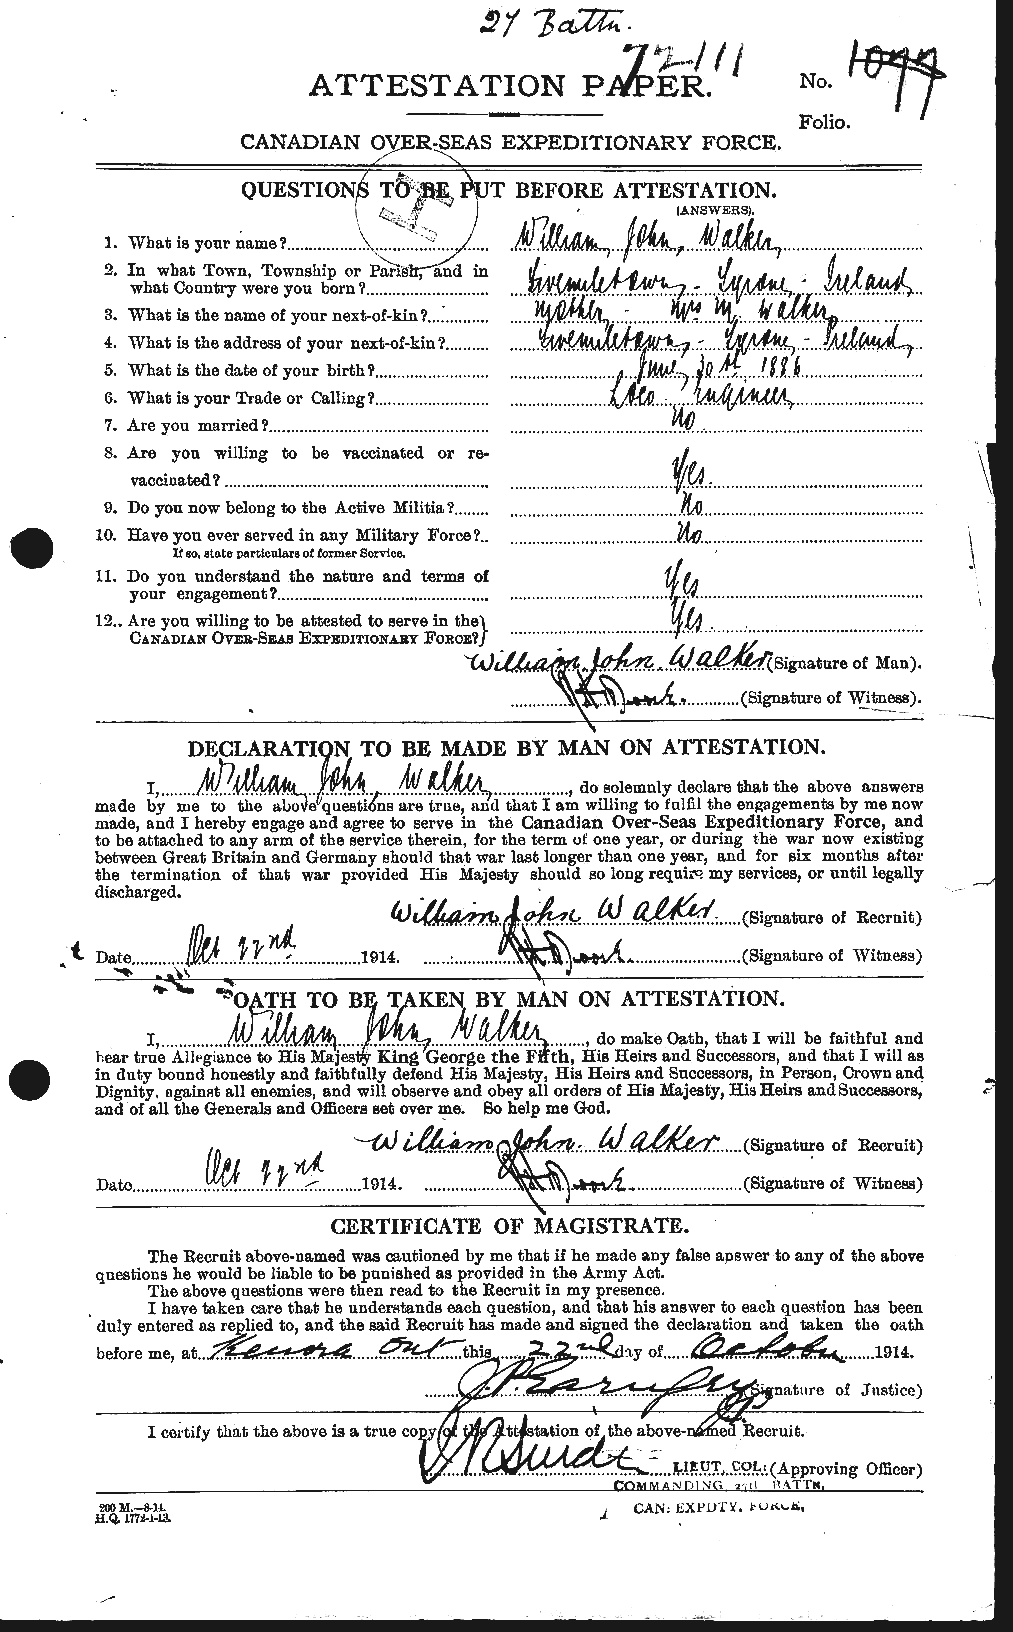 Personnel Records of the First World War - CEF 661448a